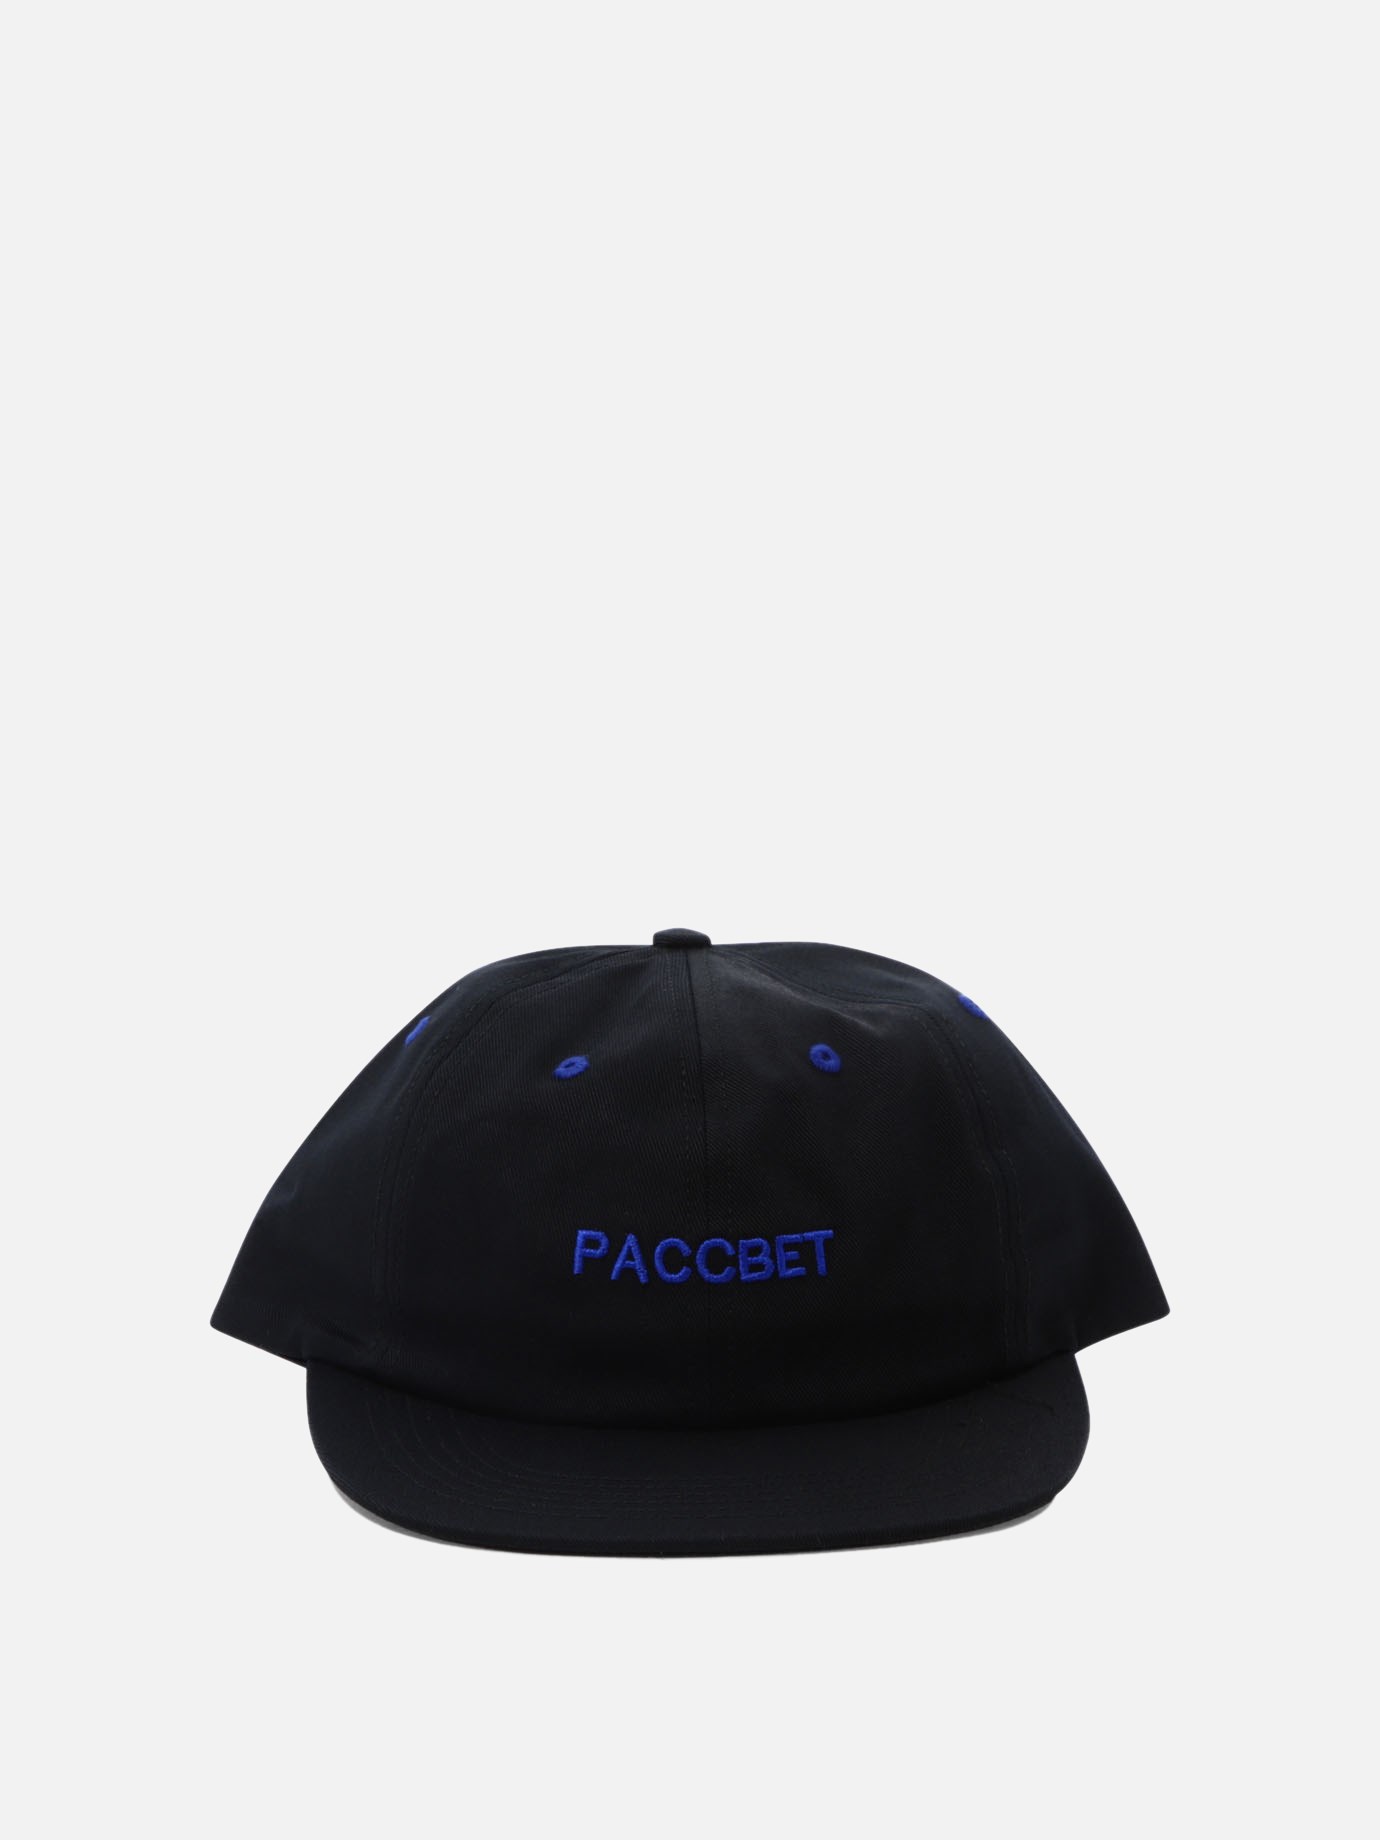 Cappello trucker  Paccbet by Paccbet - 4